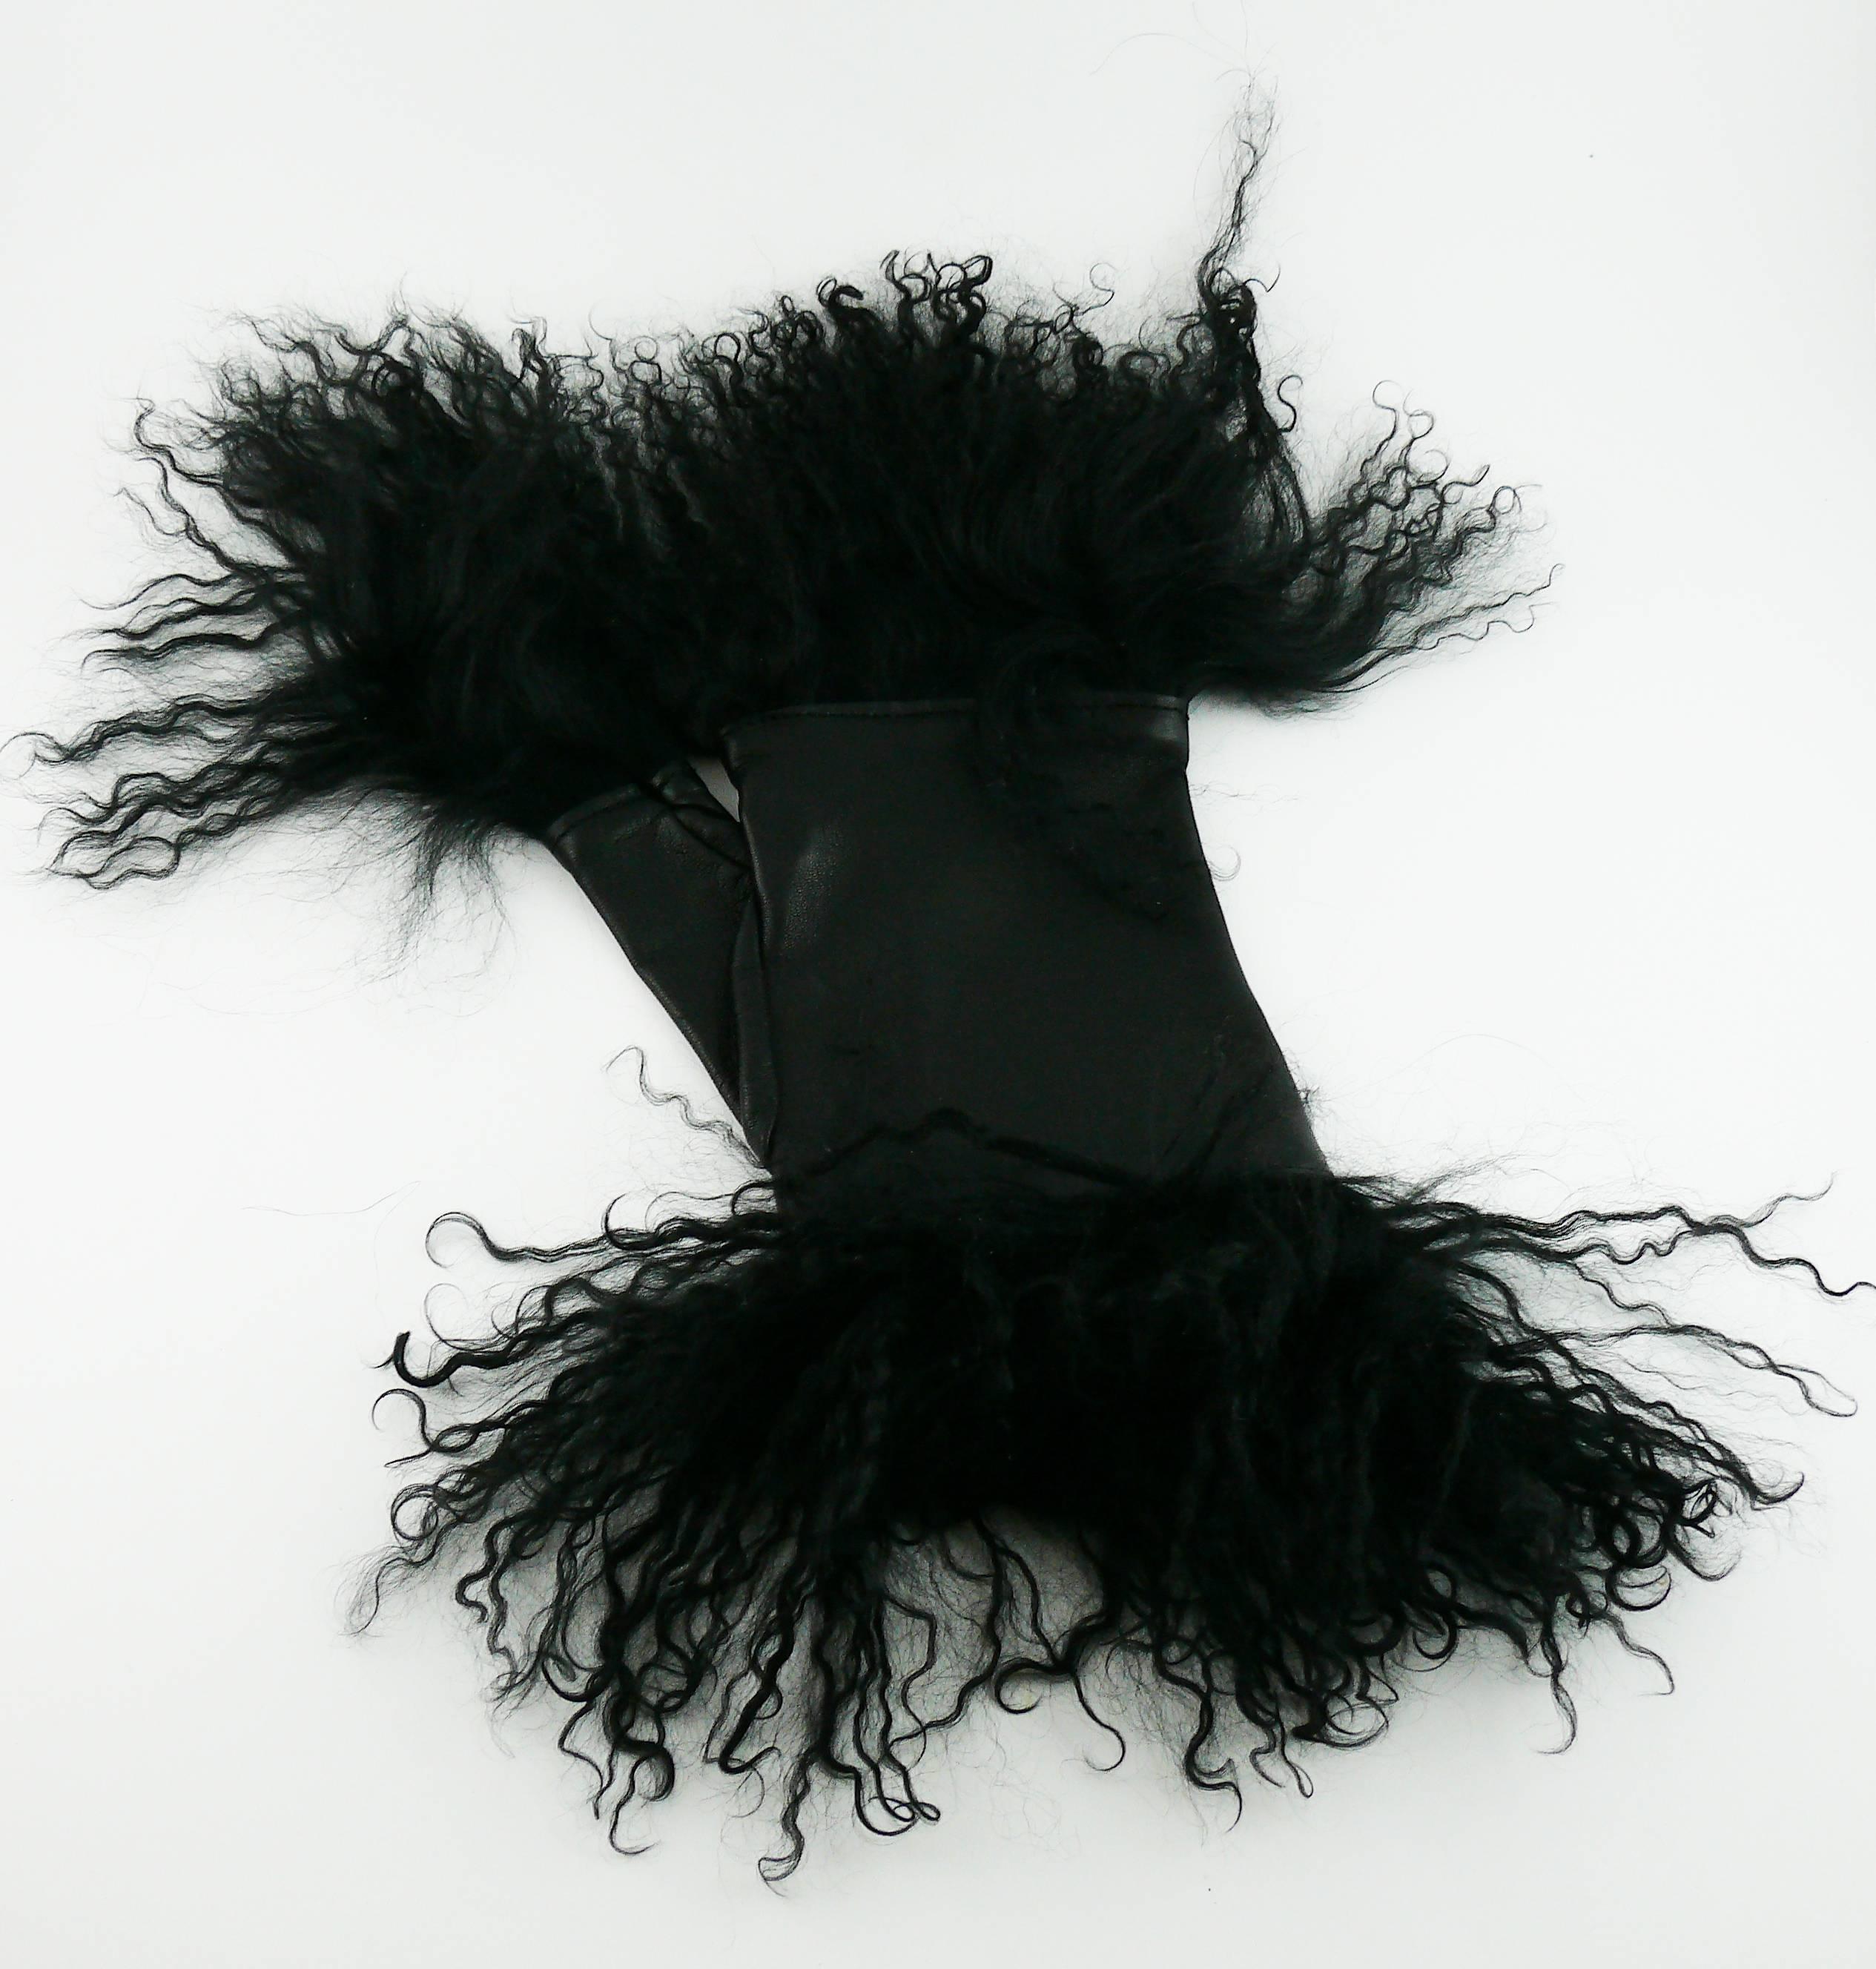 YOHJI YAMAMOTO black lambskin fingerless gloves mitts embellished with Mongolian lamb fur.

Early 2000s.
Probably from Winter 2000 Collection.

Label reads YOHJI YAMAMOTO (only attached on one glove).
Printed "Cuir Agneau" and size